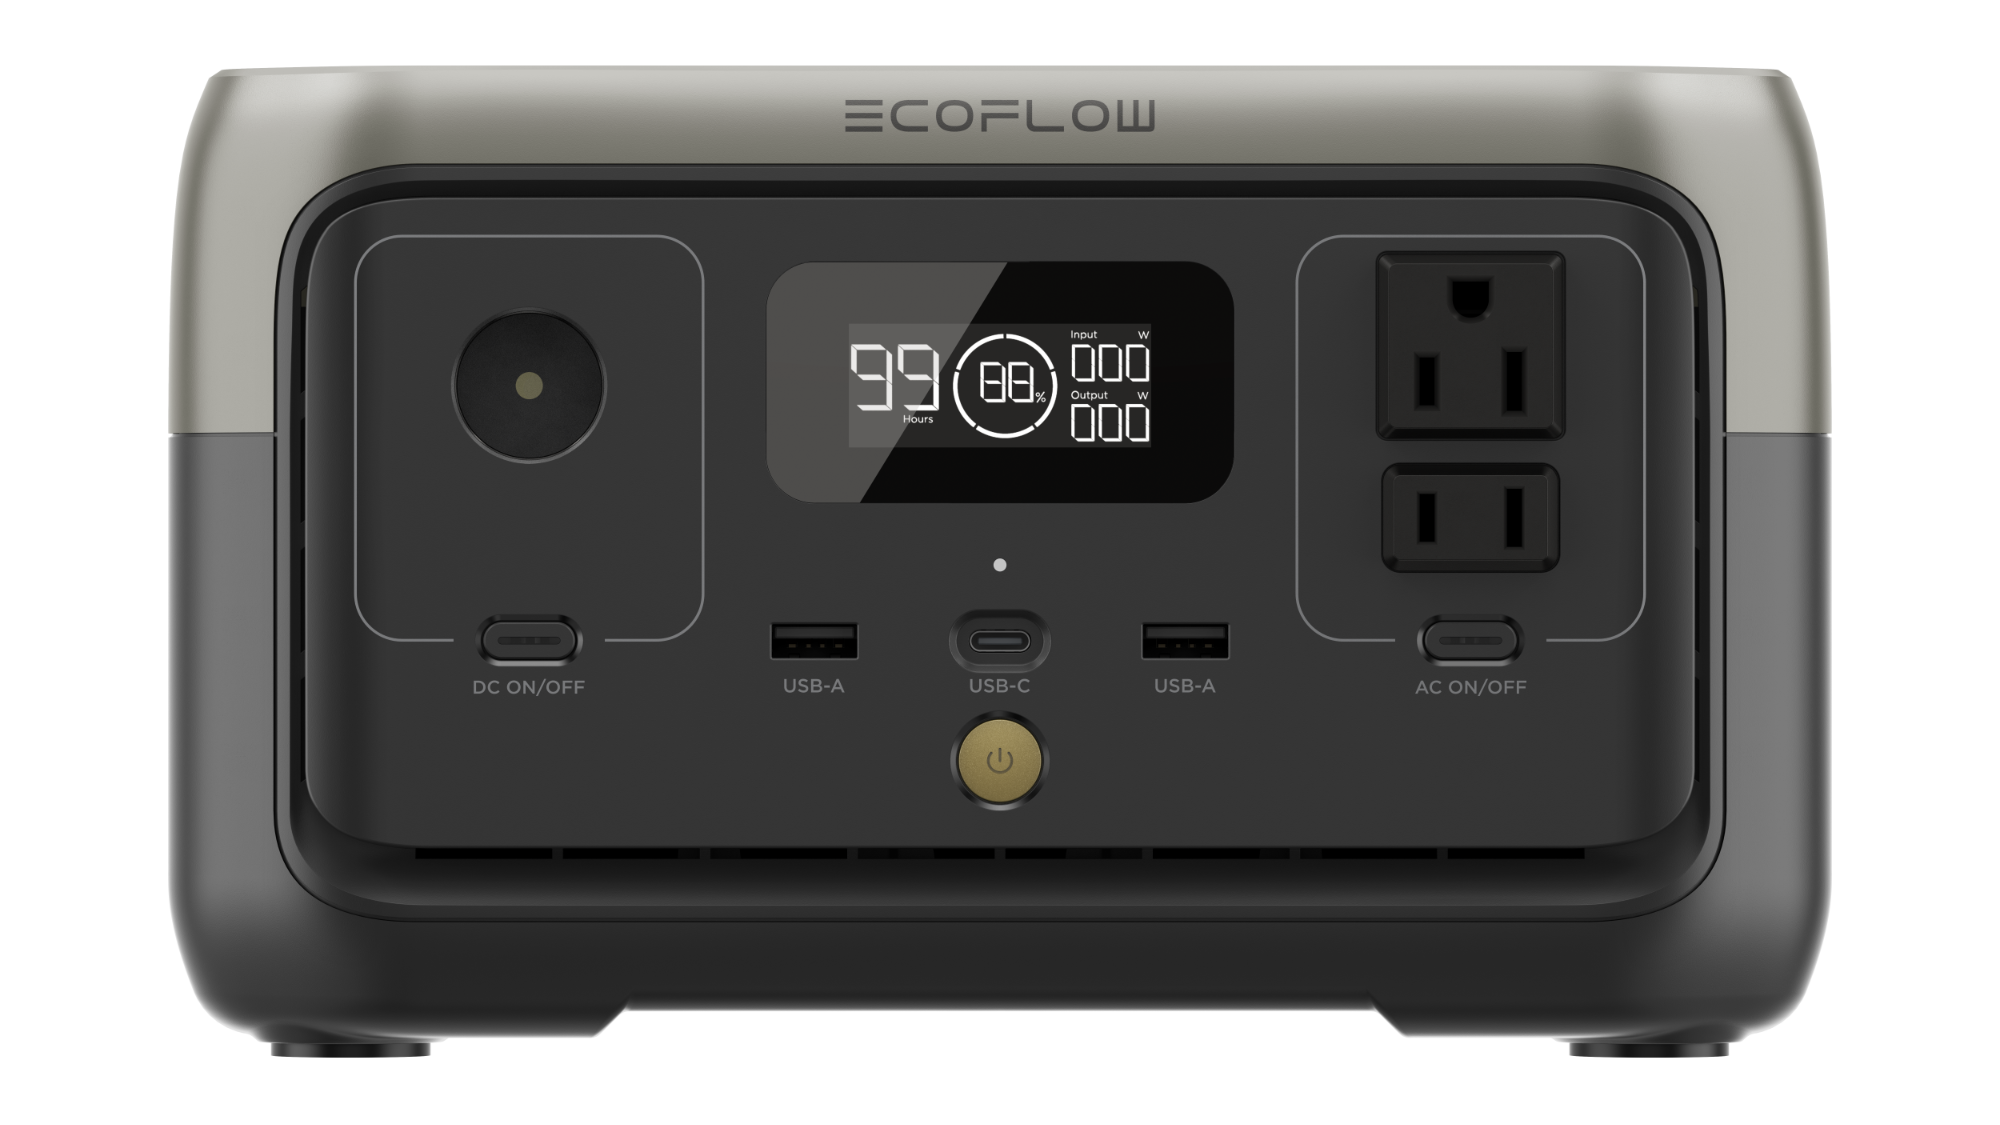 Ecoflow River 2 Max Power Station Review - This River Runs Through It -  Stuff South Africa